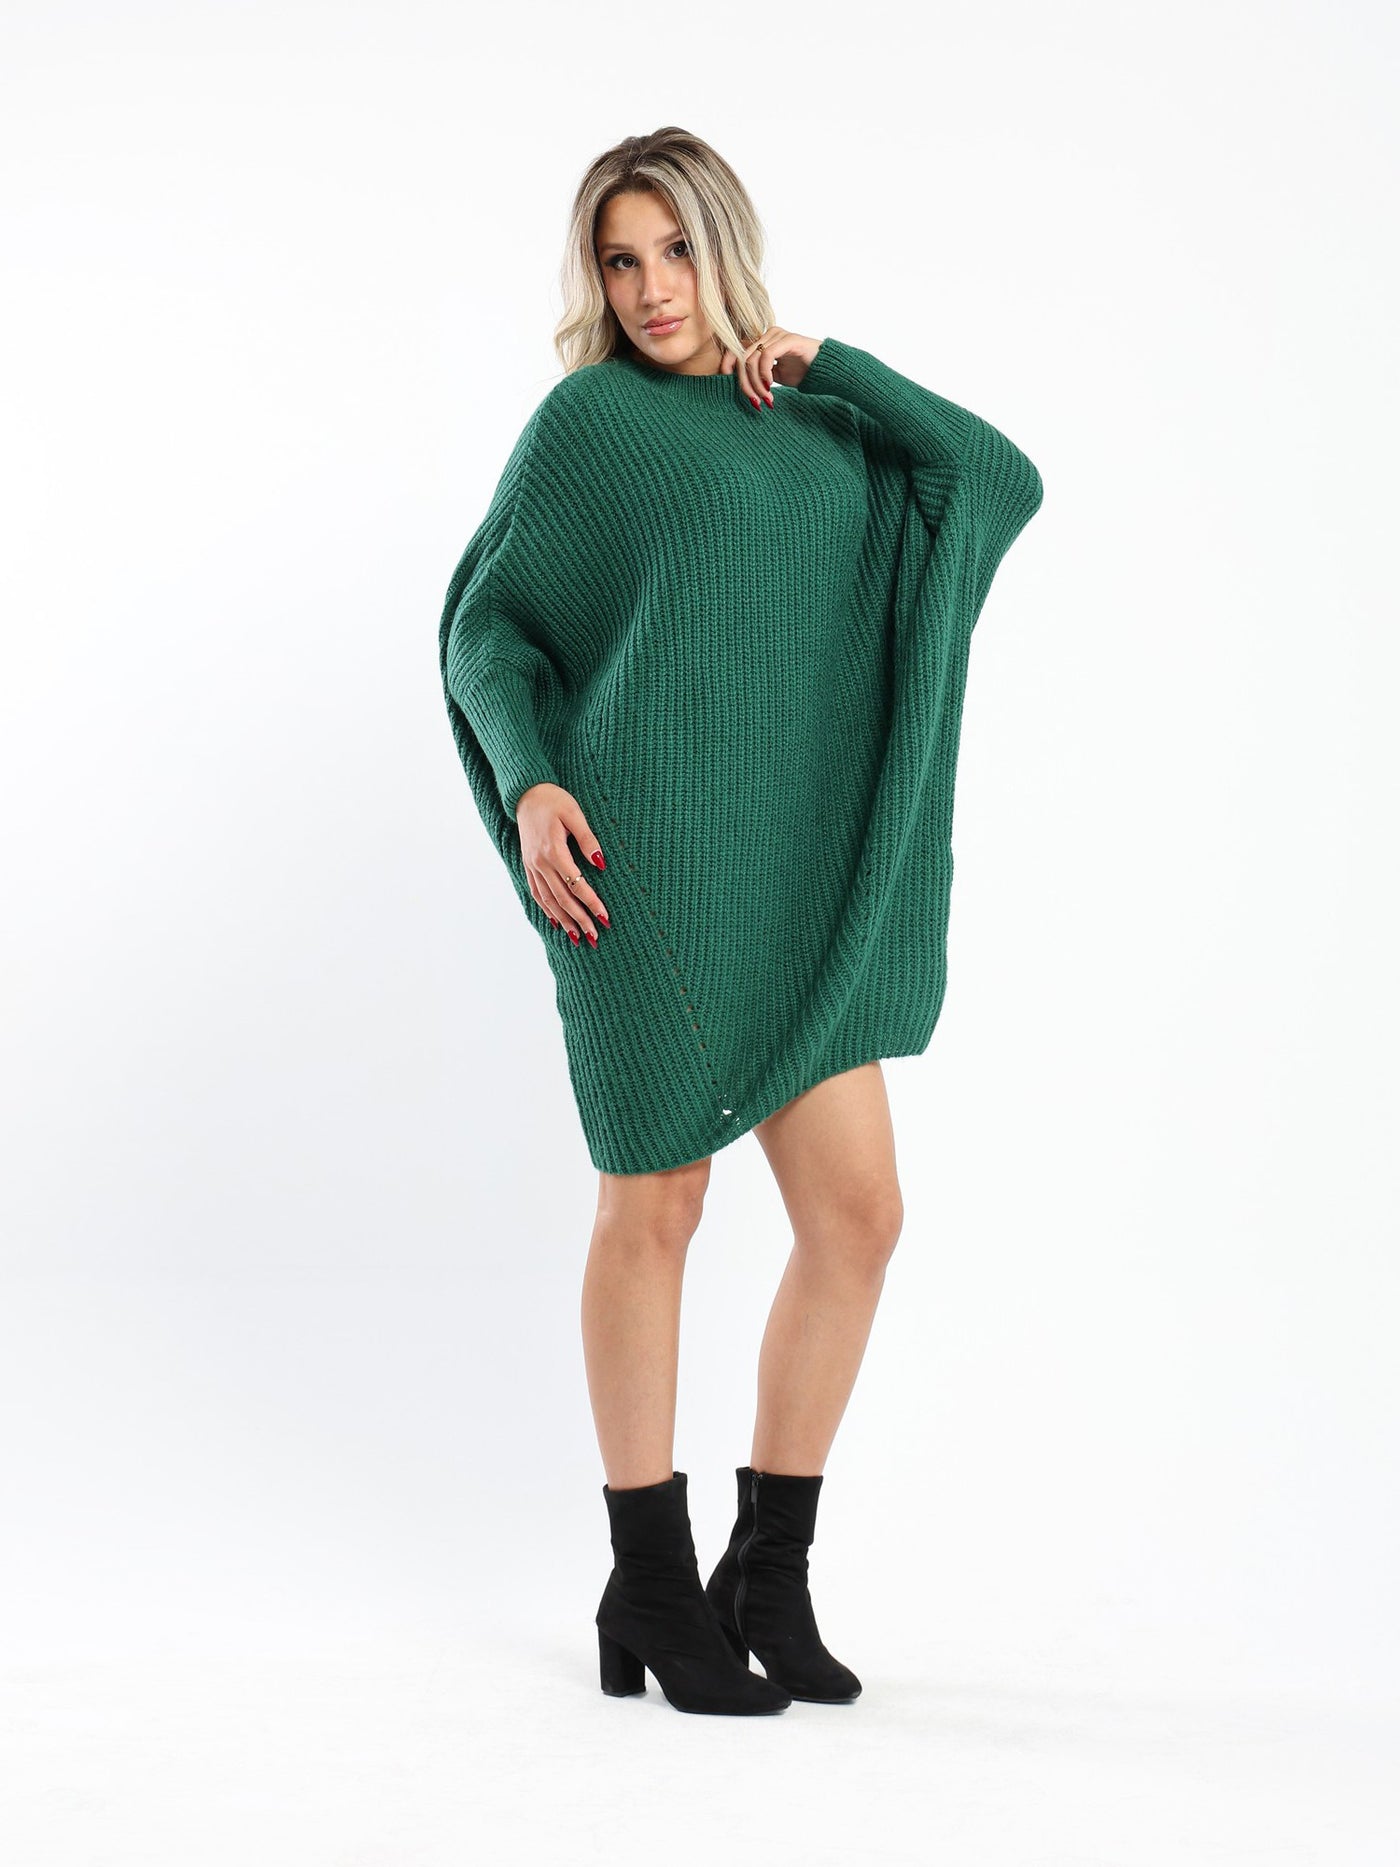 Dress - Knitted - Batwing Sleeves